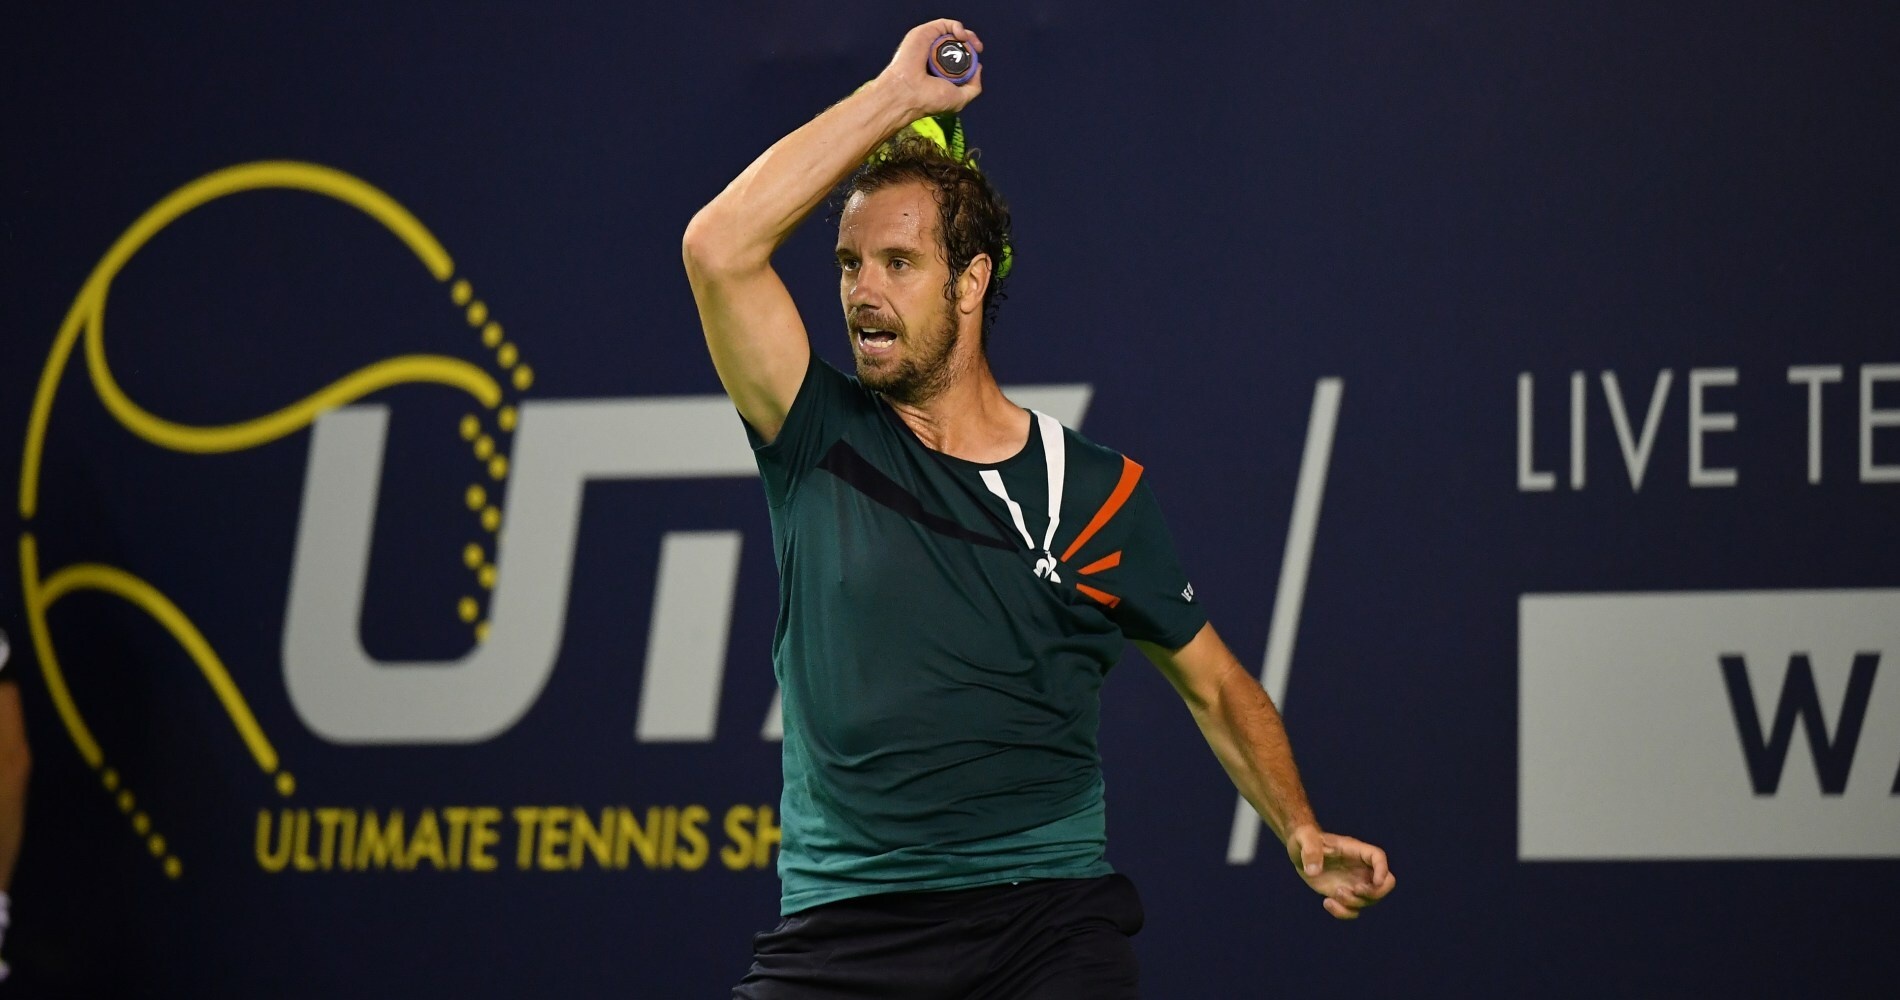 Gasquet and Lopez Produces Major Upsets - Highlights from UTS Day 3 Night Session